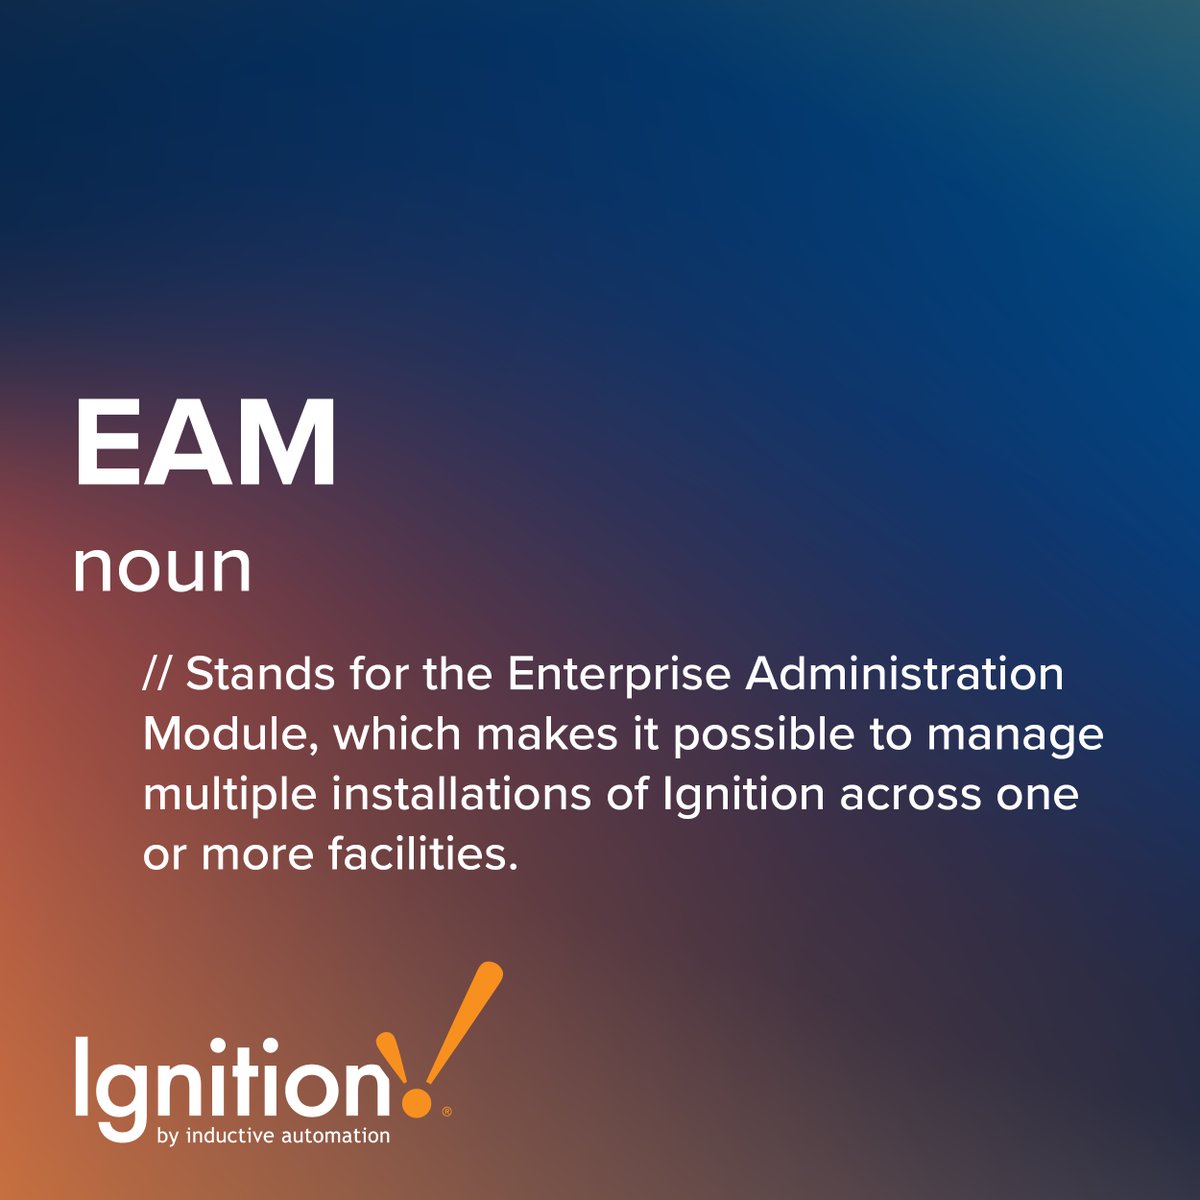 Looking to the future and planning ahead is part of the #IgnitionEffect. By keeping the expansion of your #enterprise in mind, you can be ready for growth with quick turnaround thanks to the Enterprise Administration Module. Get the details: inductiveautomation.com/ignition/modul…